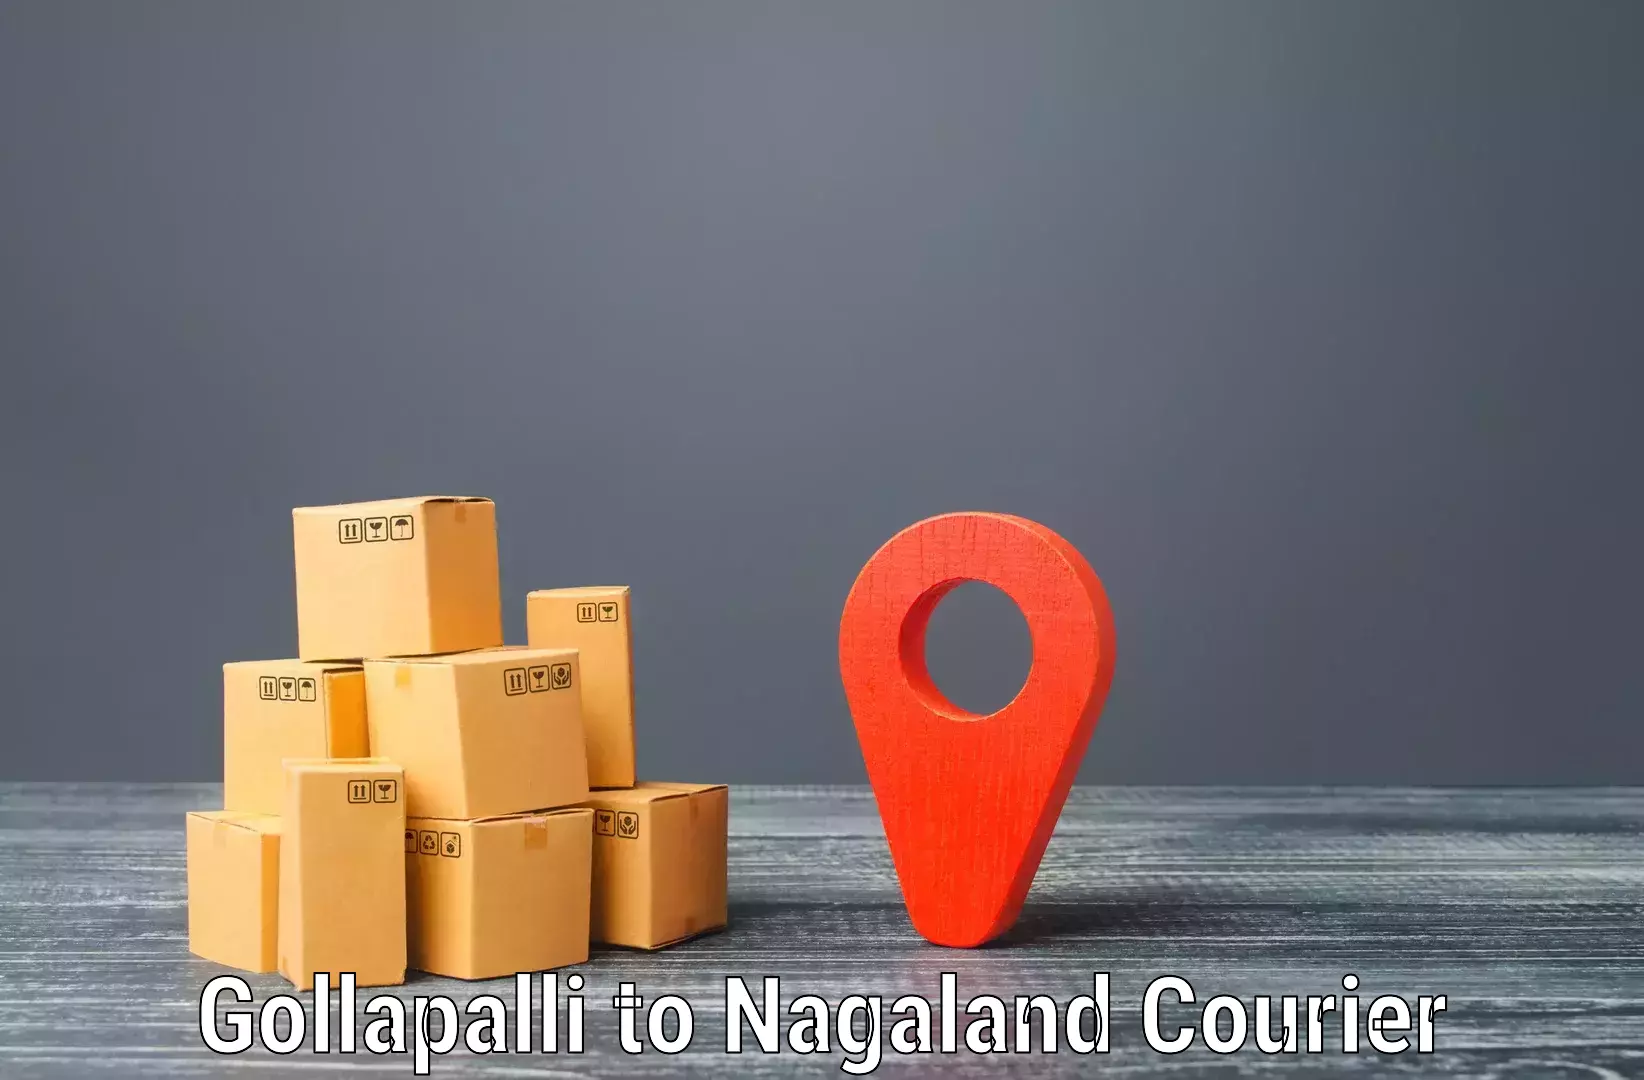 Flexible delivery schedules Gollapalli to NIT Nagaland